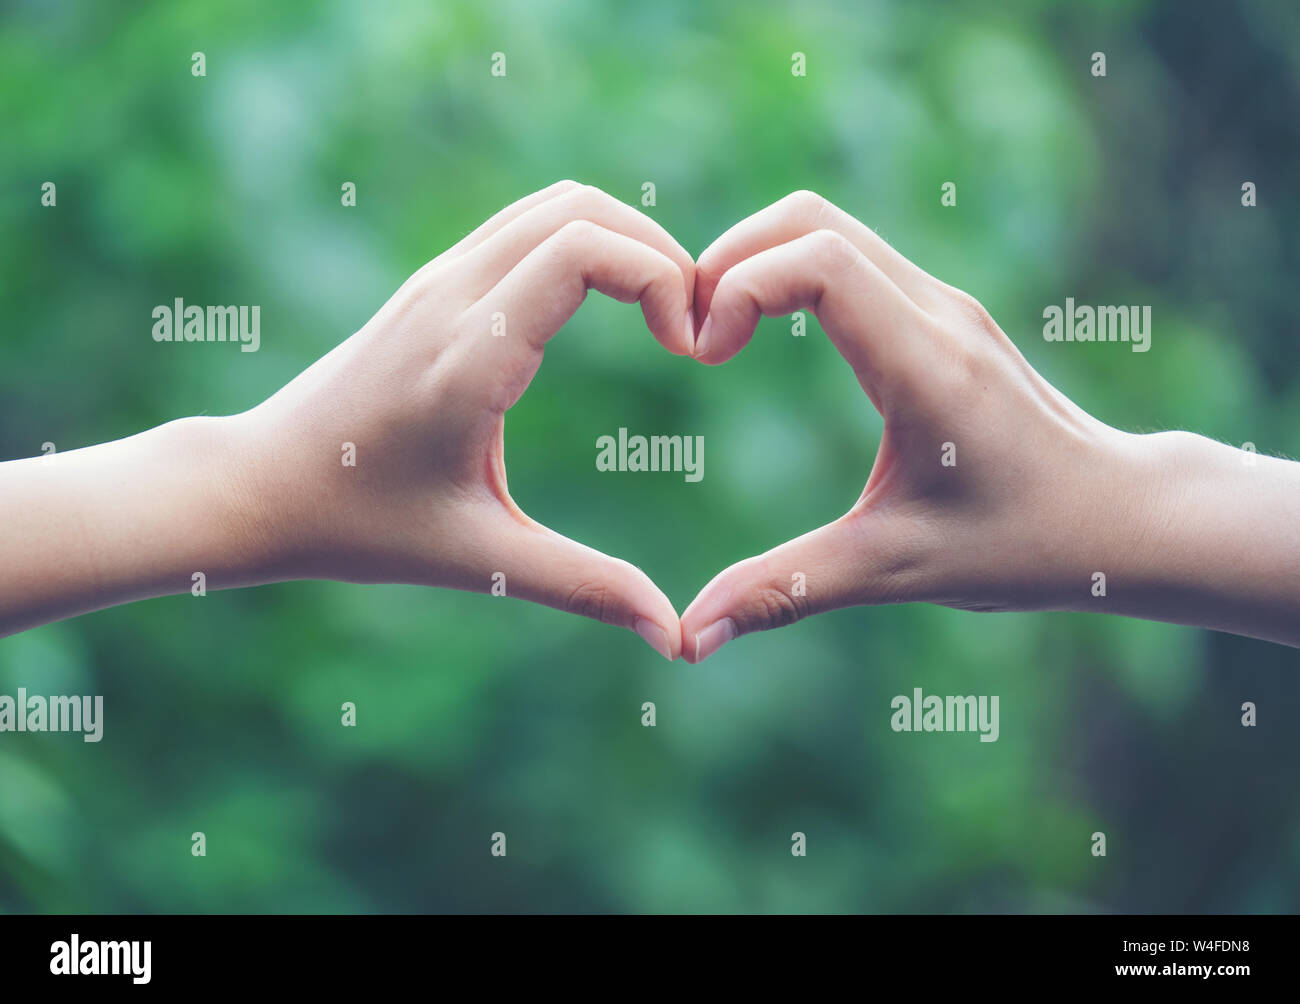 women making heart shapes with their hands on nature green background Stock Photo